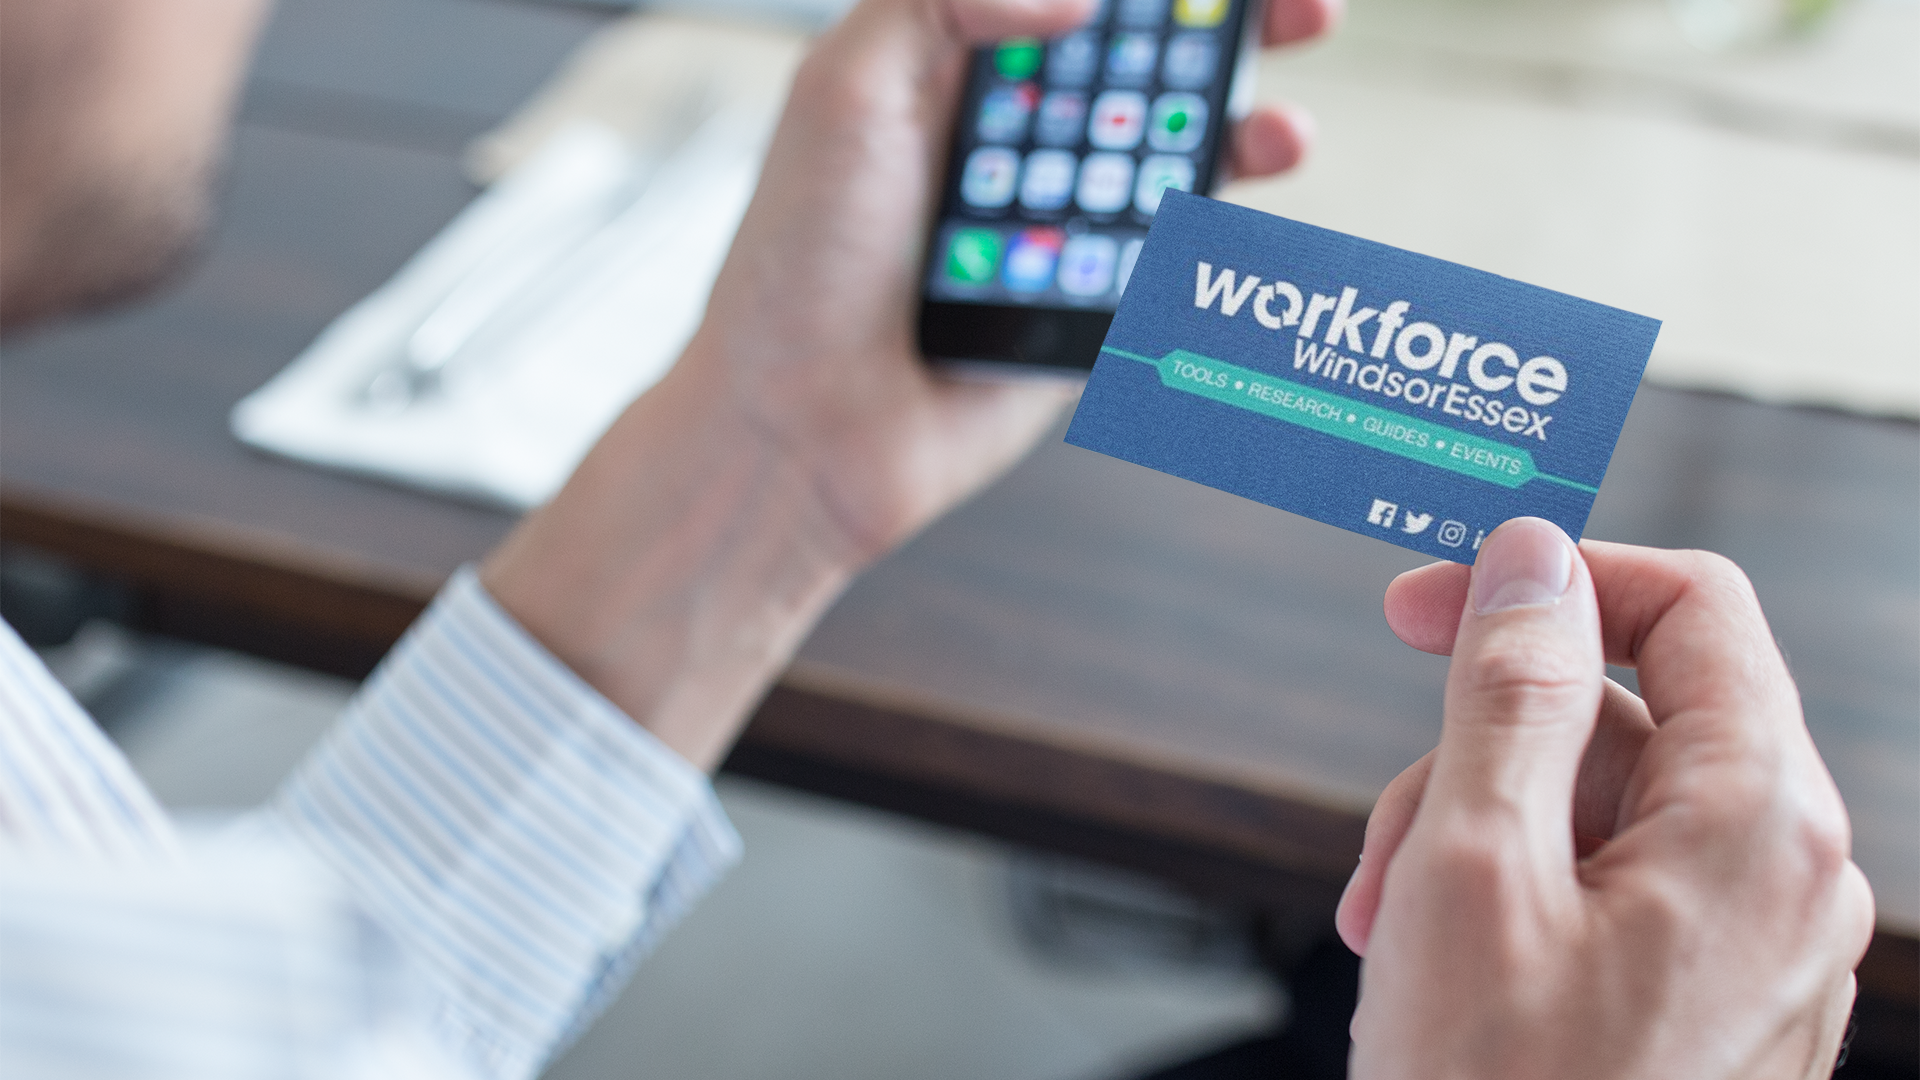 Person holding Workforce WindsorEssex business card